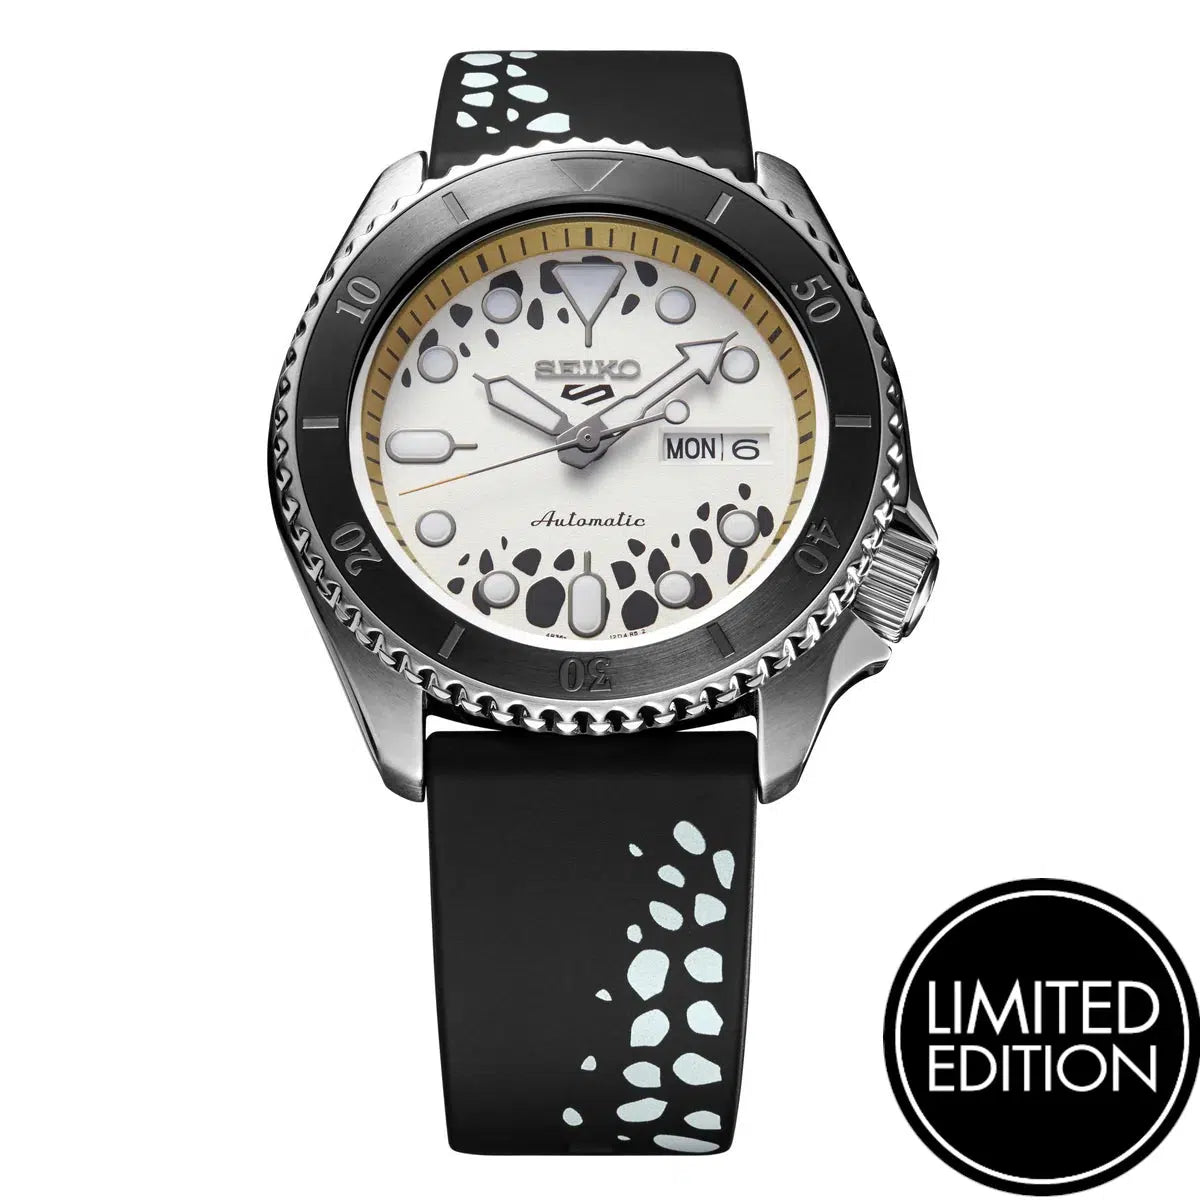 Seiko 5 Sports ONE PIECE Limited Edition - SRPH63K1